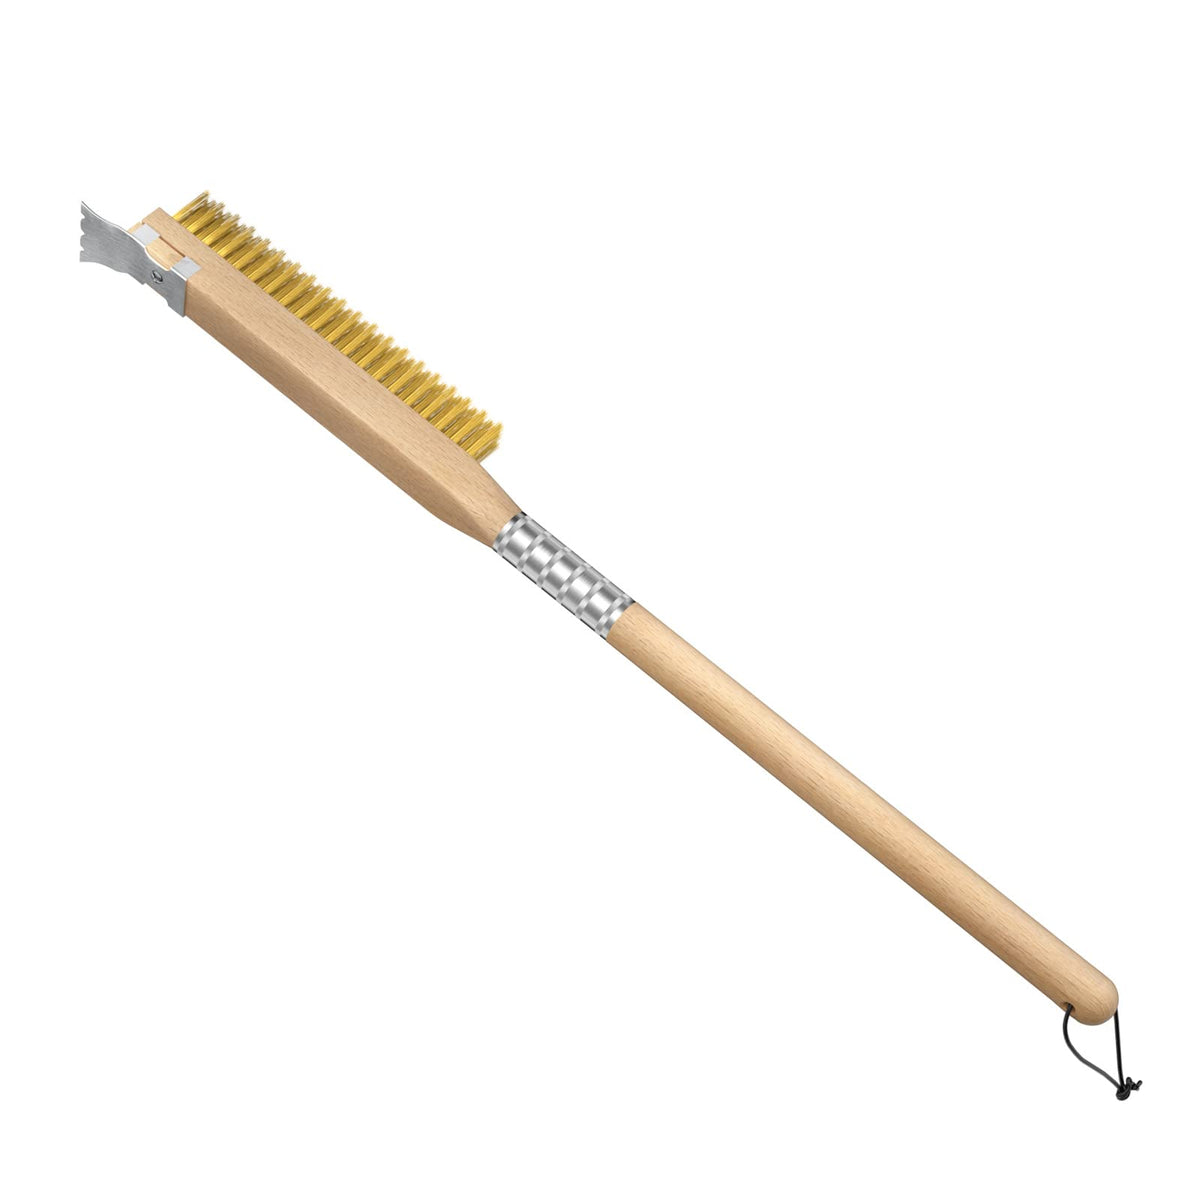 Ooni Pizza Oven Cleaning Brush with Scraper Stainless Steel Brown UU-P06800  from Ooni - Acme Tools